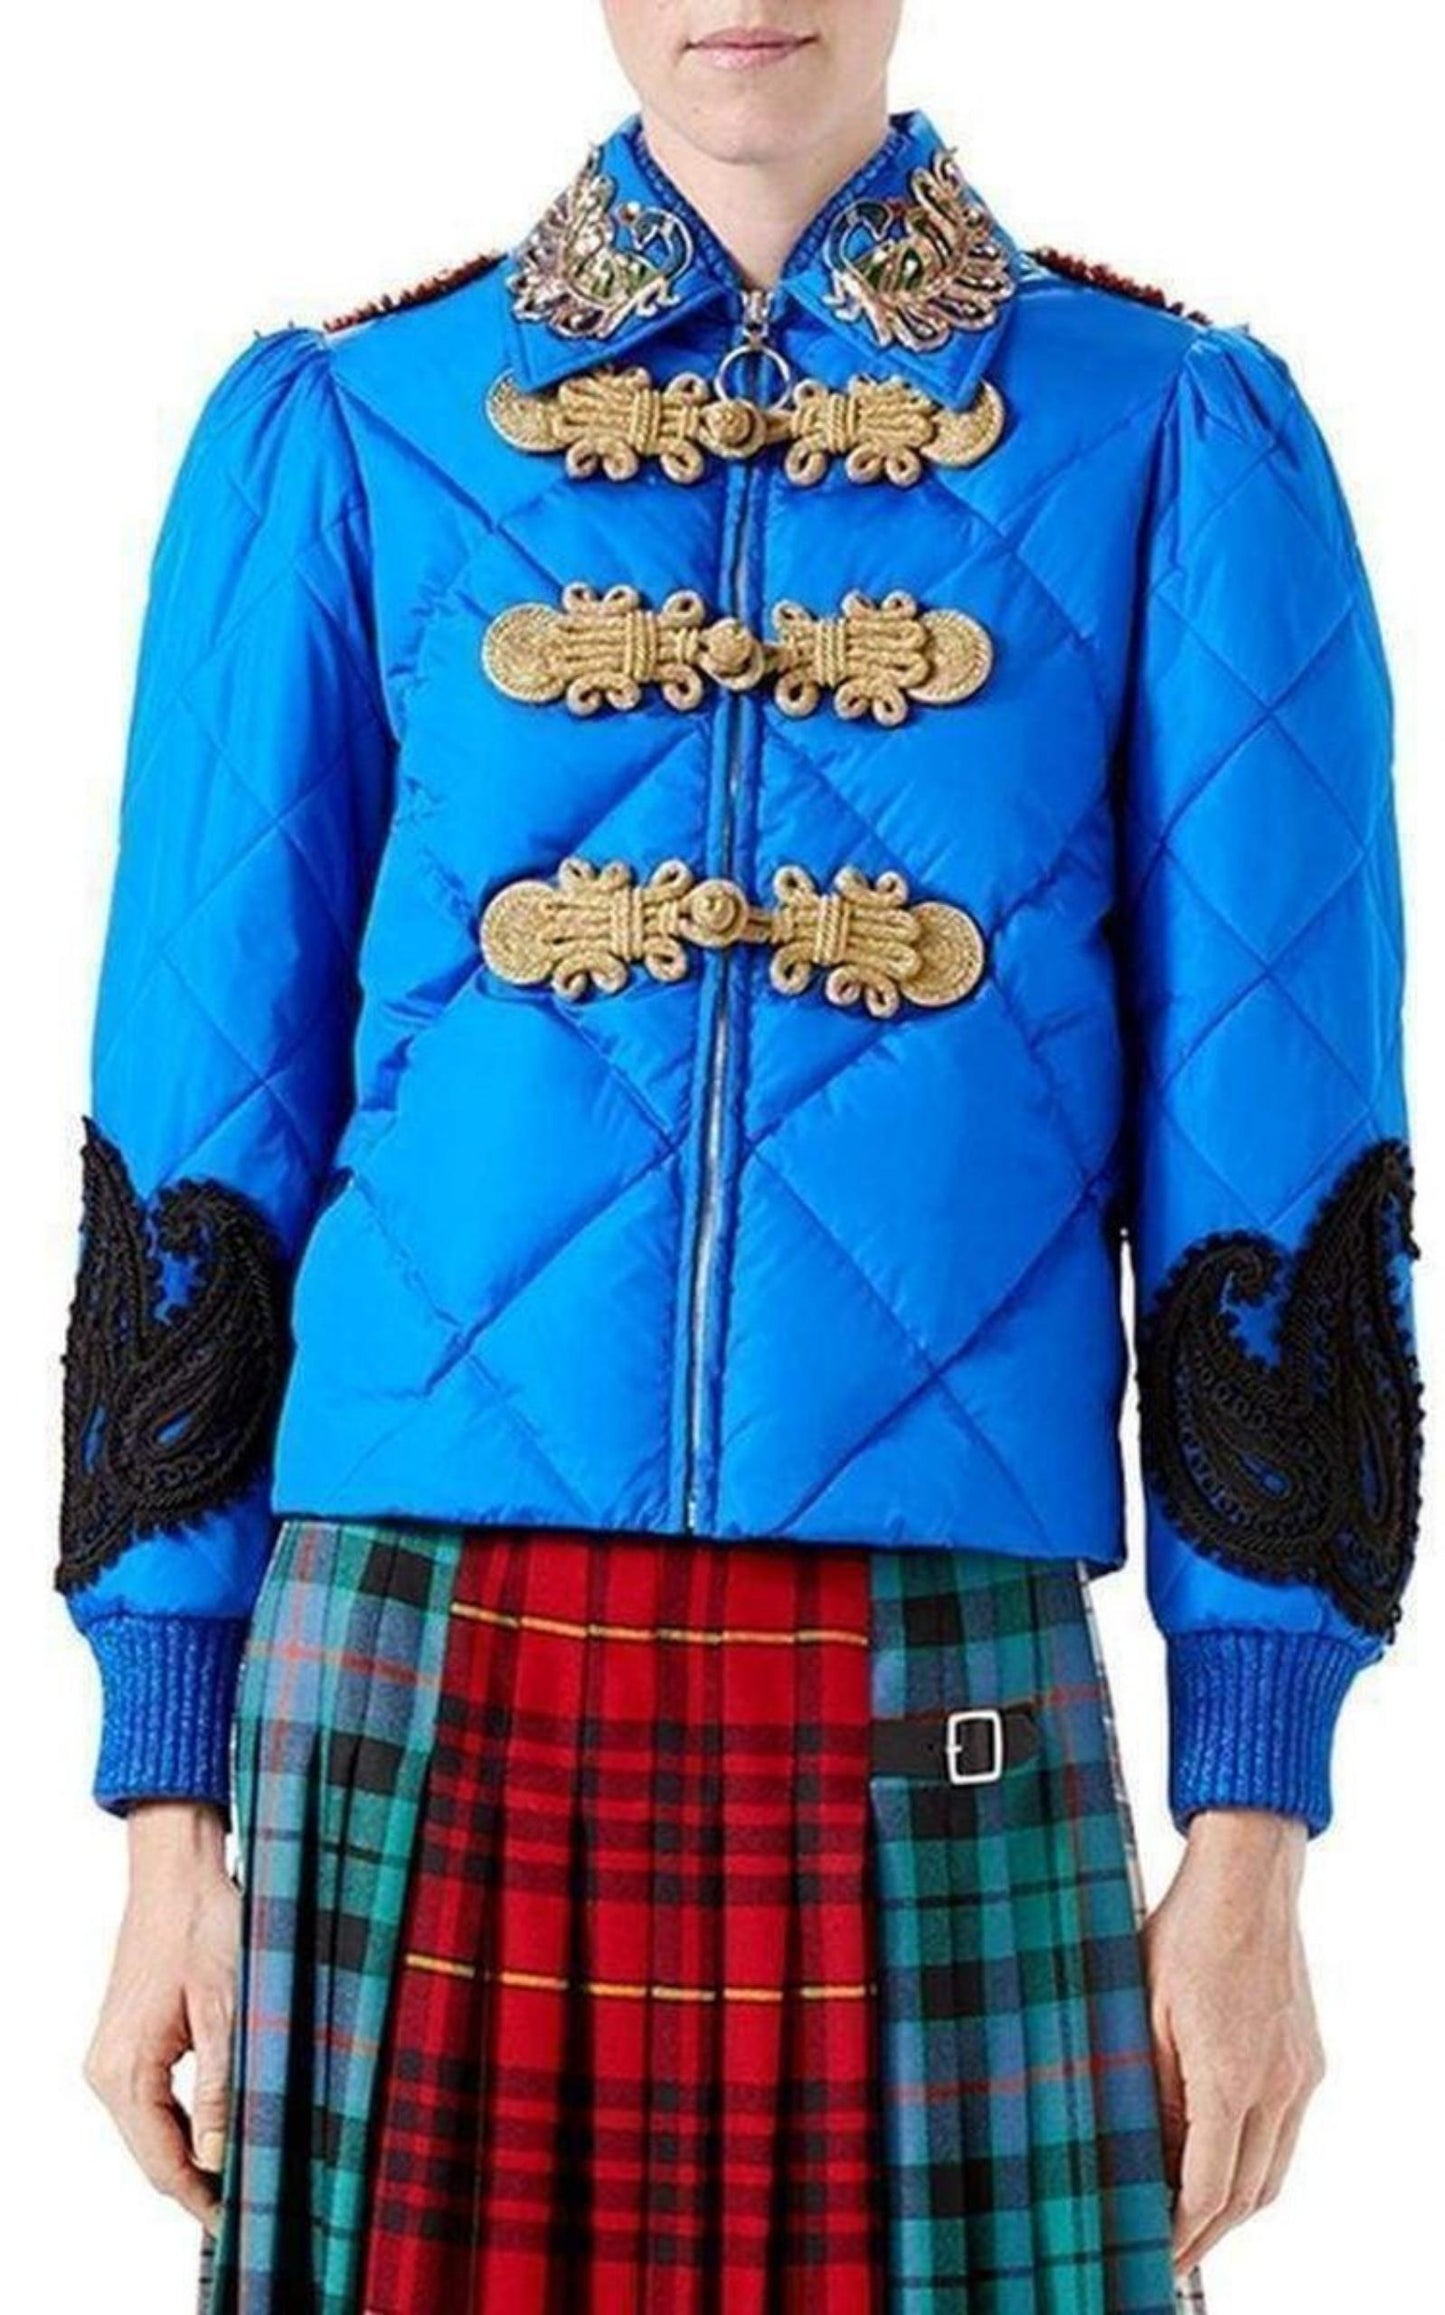  GucciQuilted Bomber Jacket - Runway Catalog